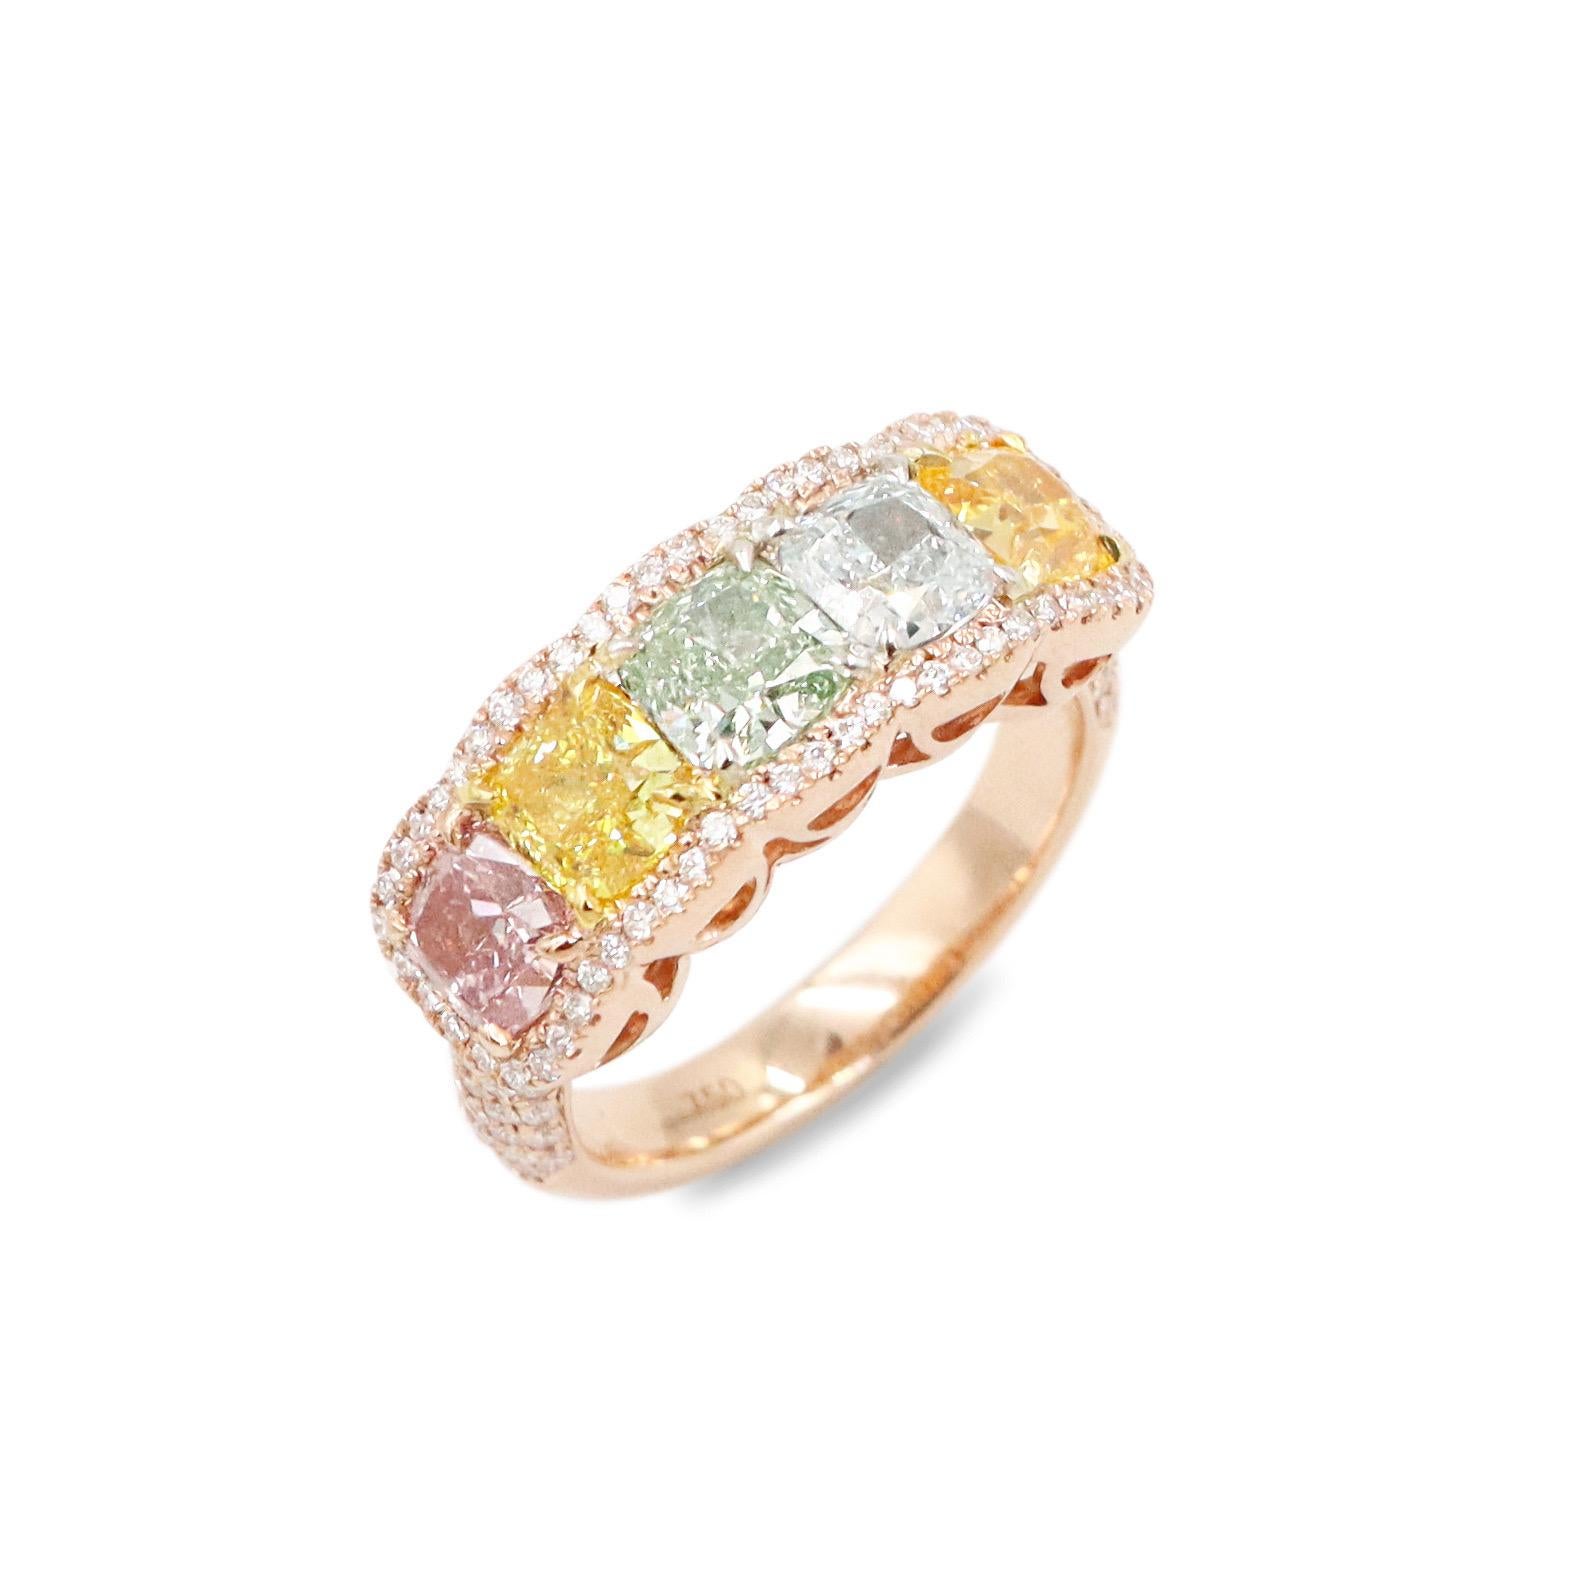 From the Museum Vault At Emilio Jewelry, a dealer located on New York's iconic Fifth Avenue,
Featuring a one of a kind diamond band set with 5 ultra rare Gia certified natural fancy rare color diamonds
1. Intense purplish Pink 
2. Vivid yellow 
3.